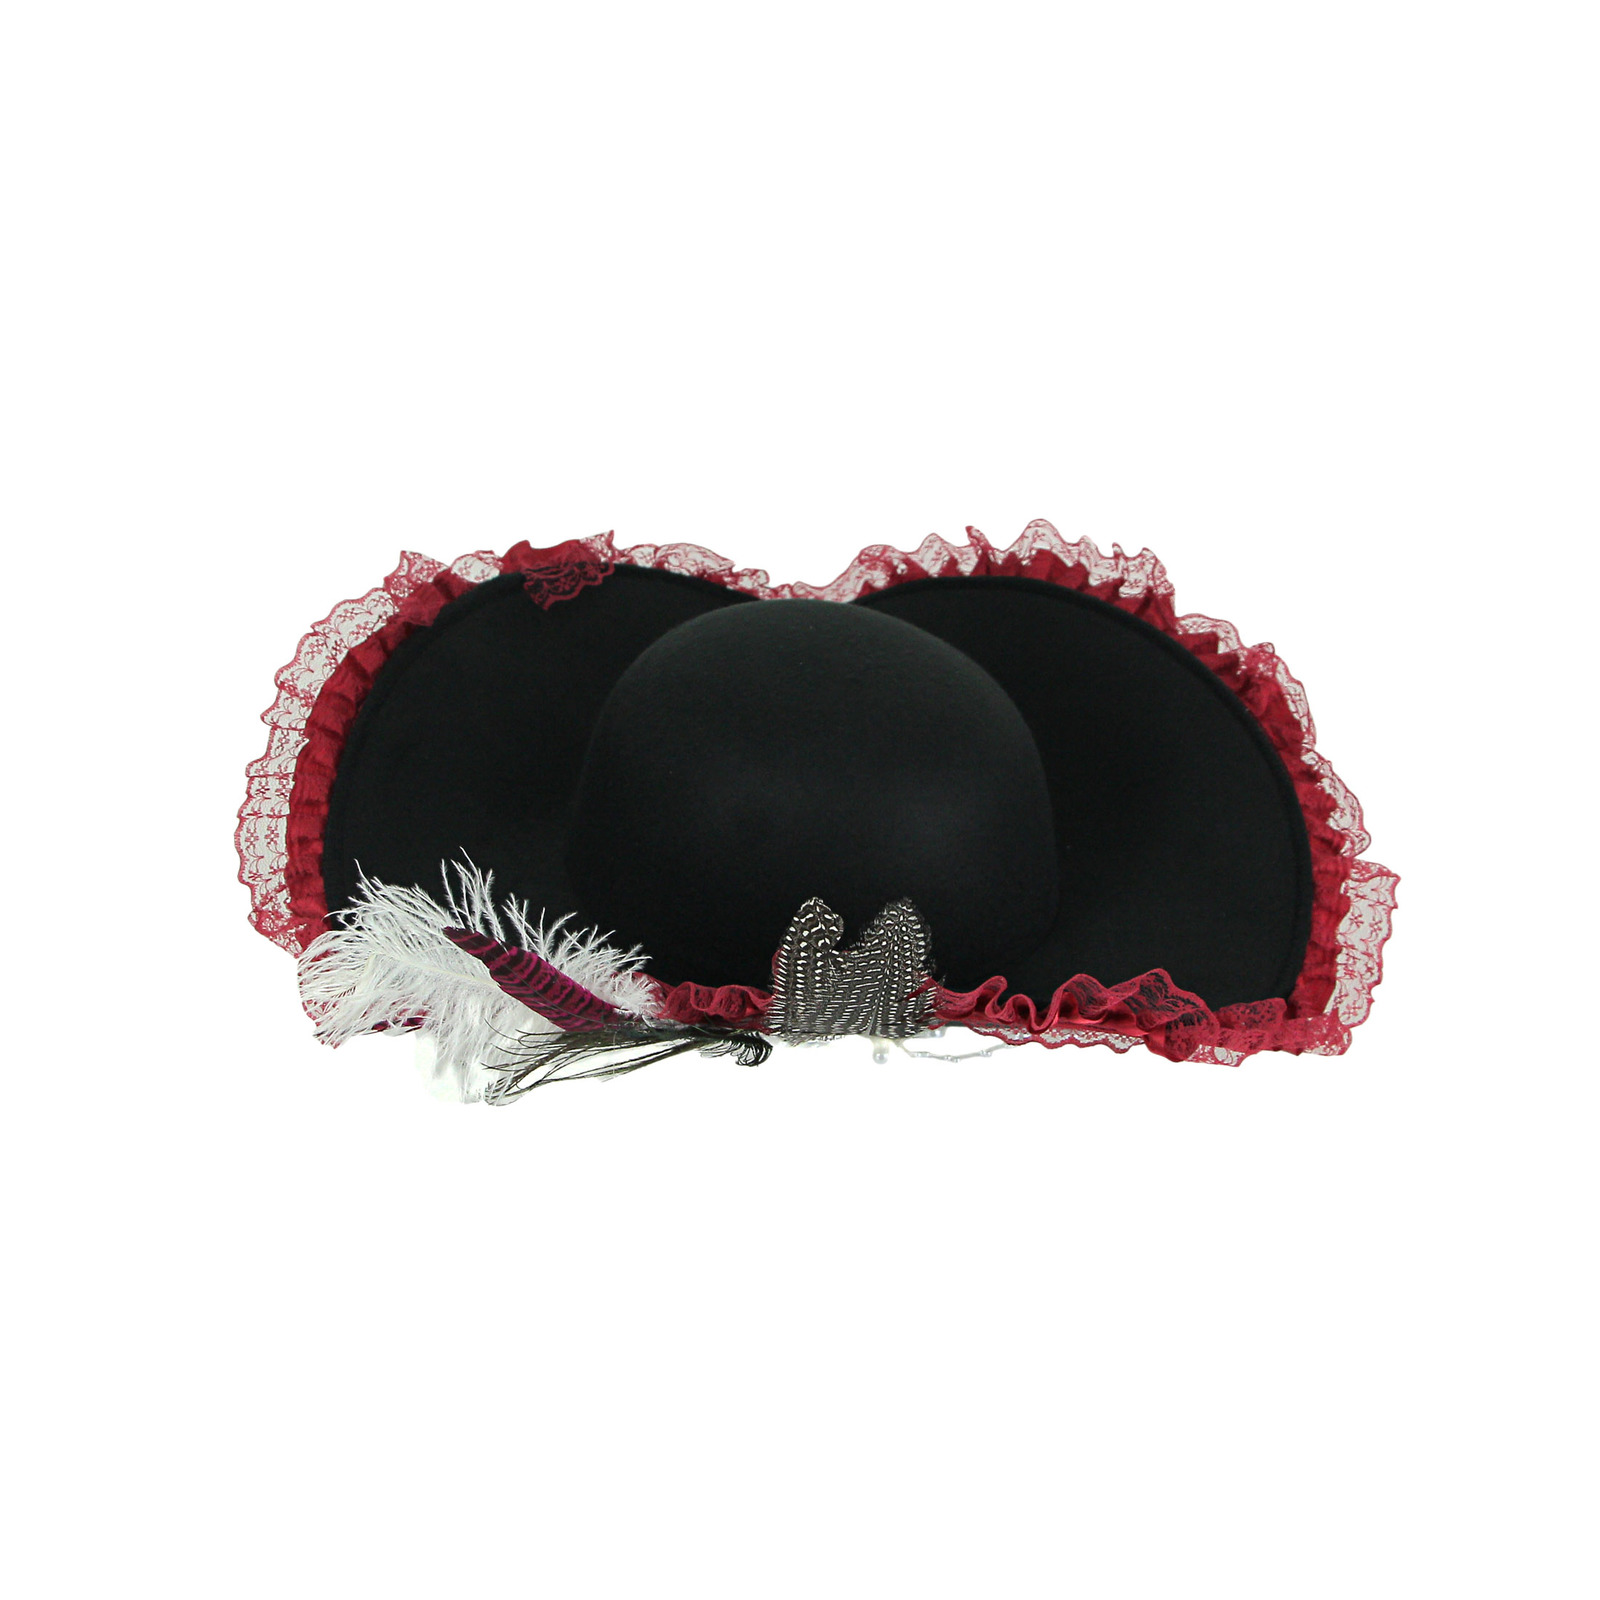 Primary image for Ladies Black and Red Lace Feather Tricorn Pirate Hat